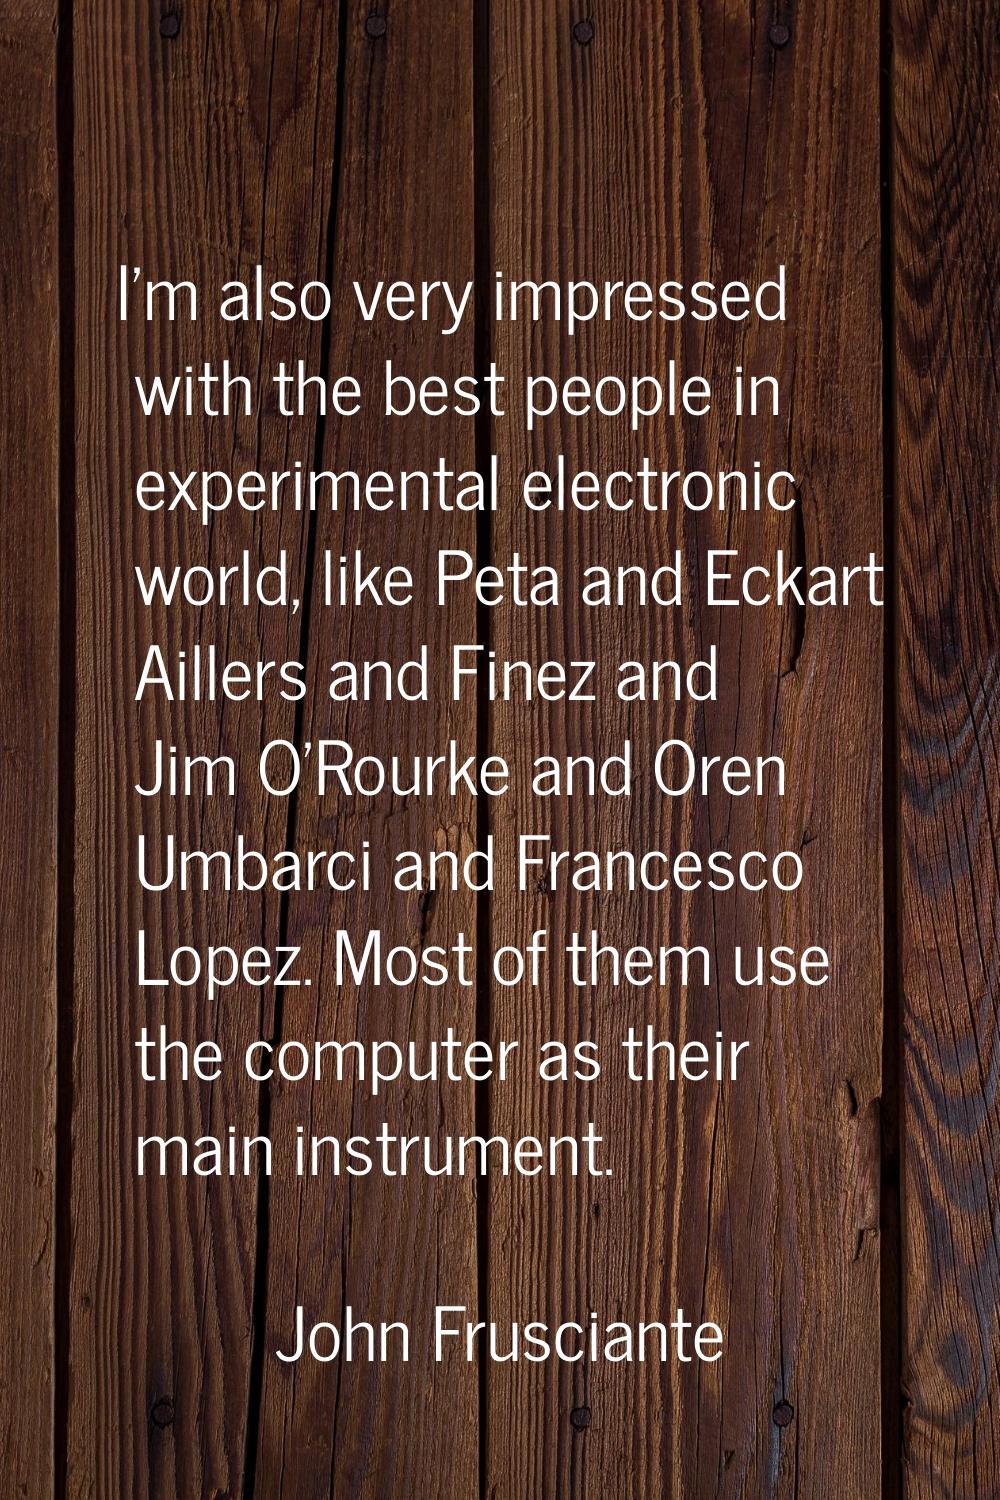 I'm also very impressed with the best people in experimental electronic world, like Peta and Eckart